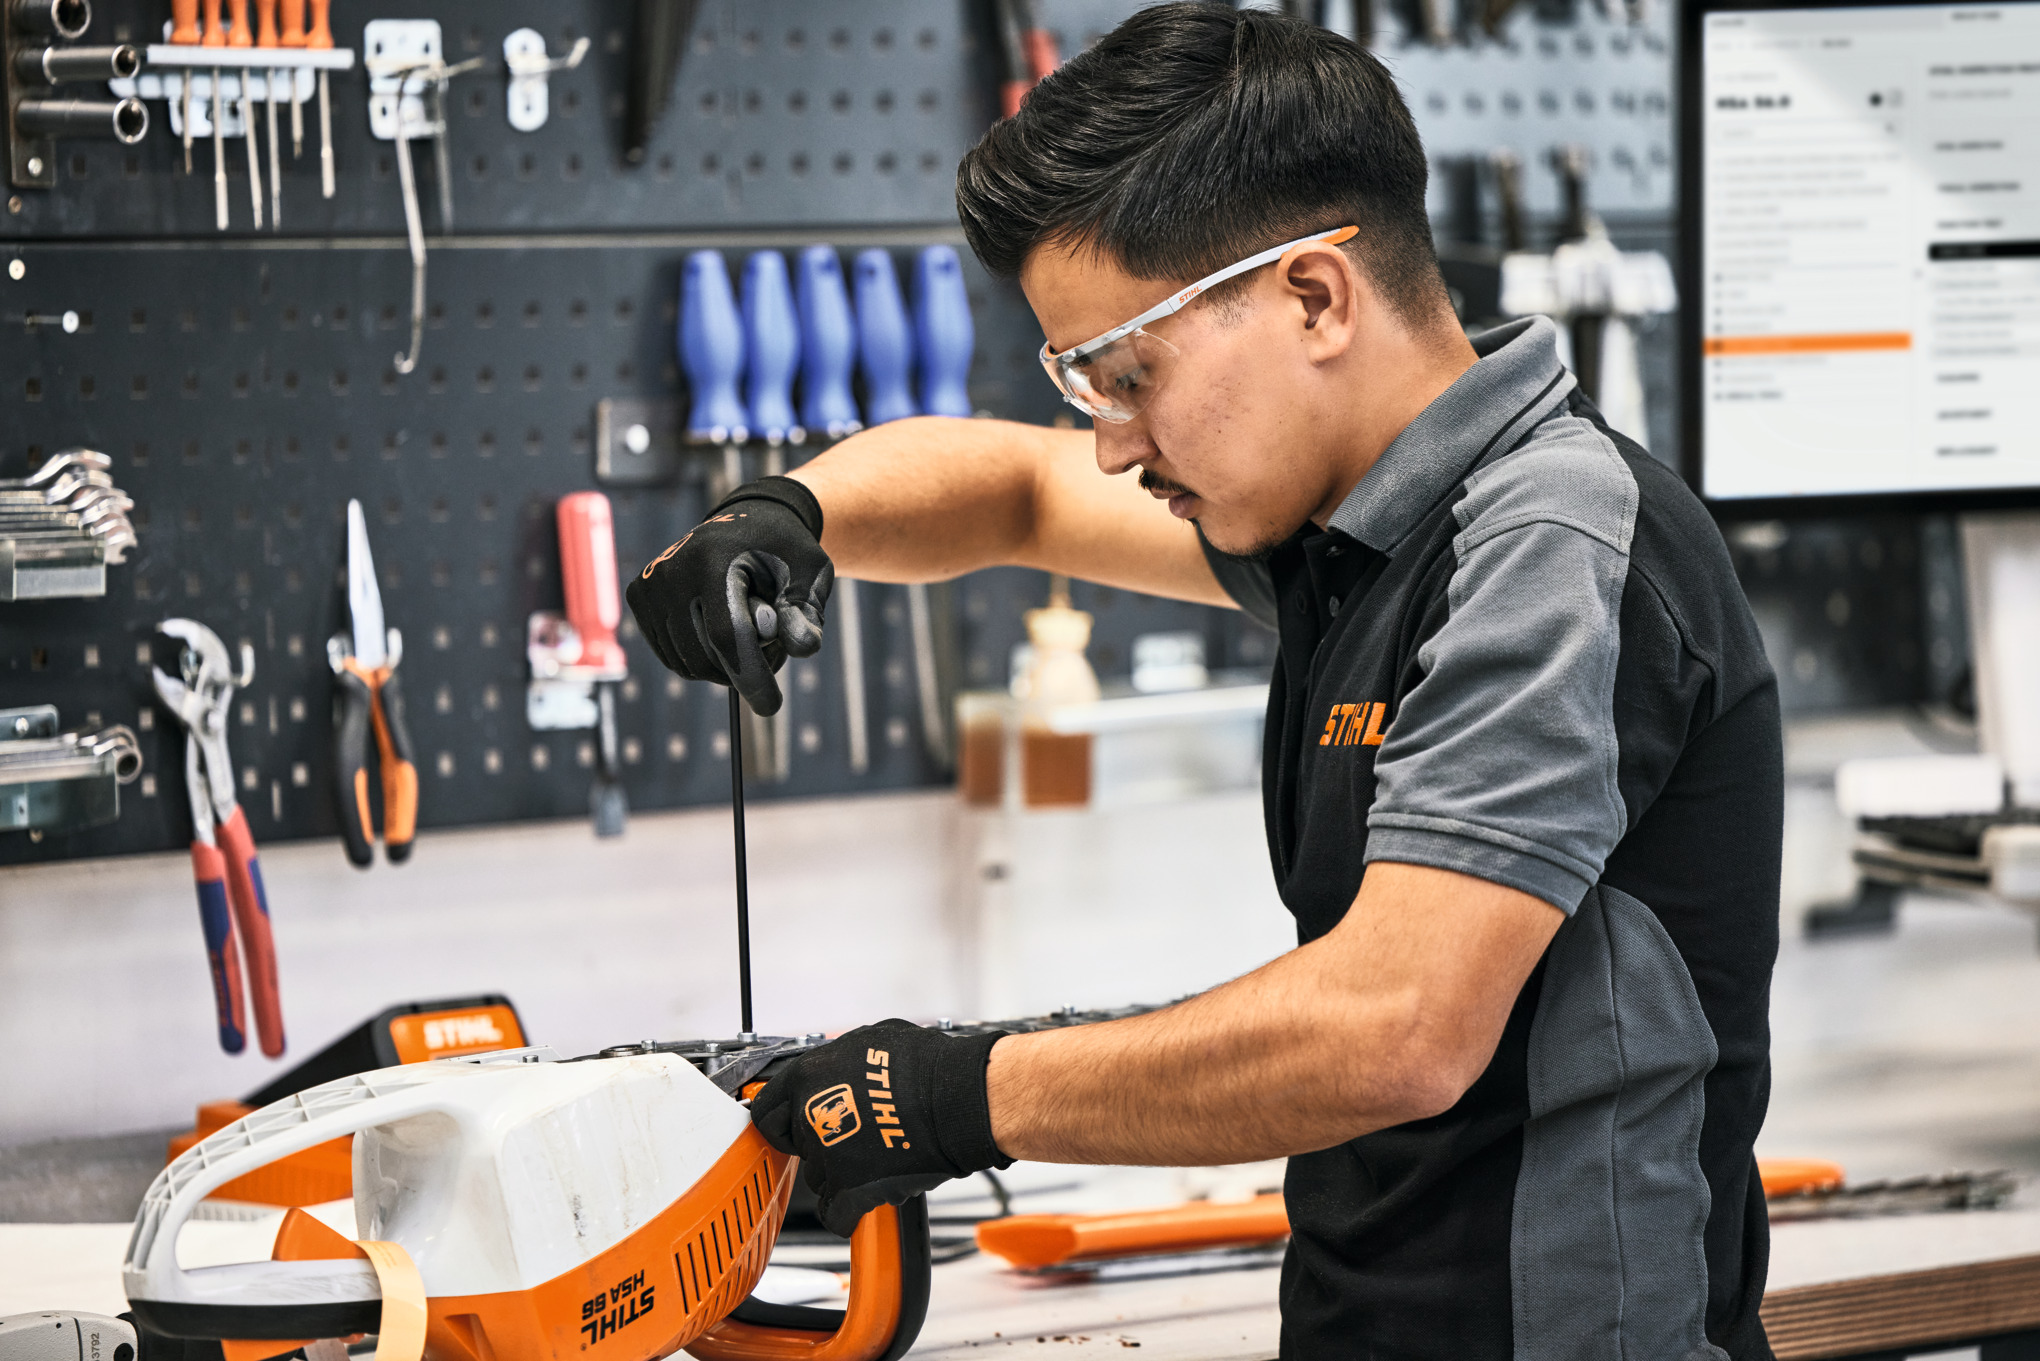 A man performing maintenance work on a STIHL hedge trimmer in the work shop